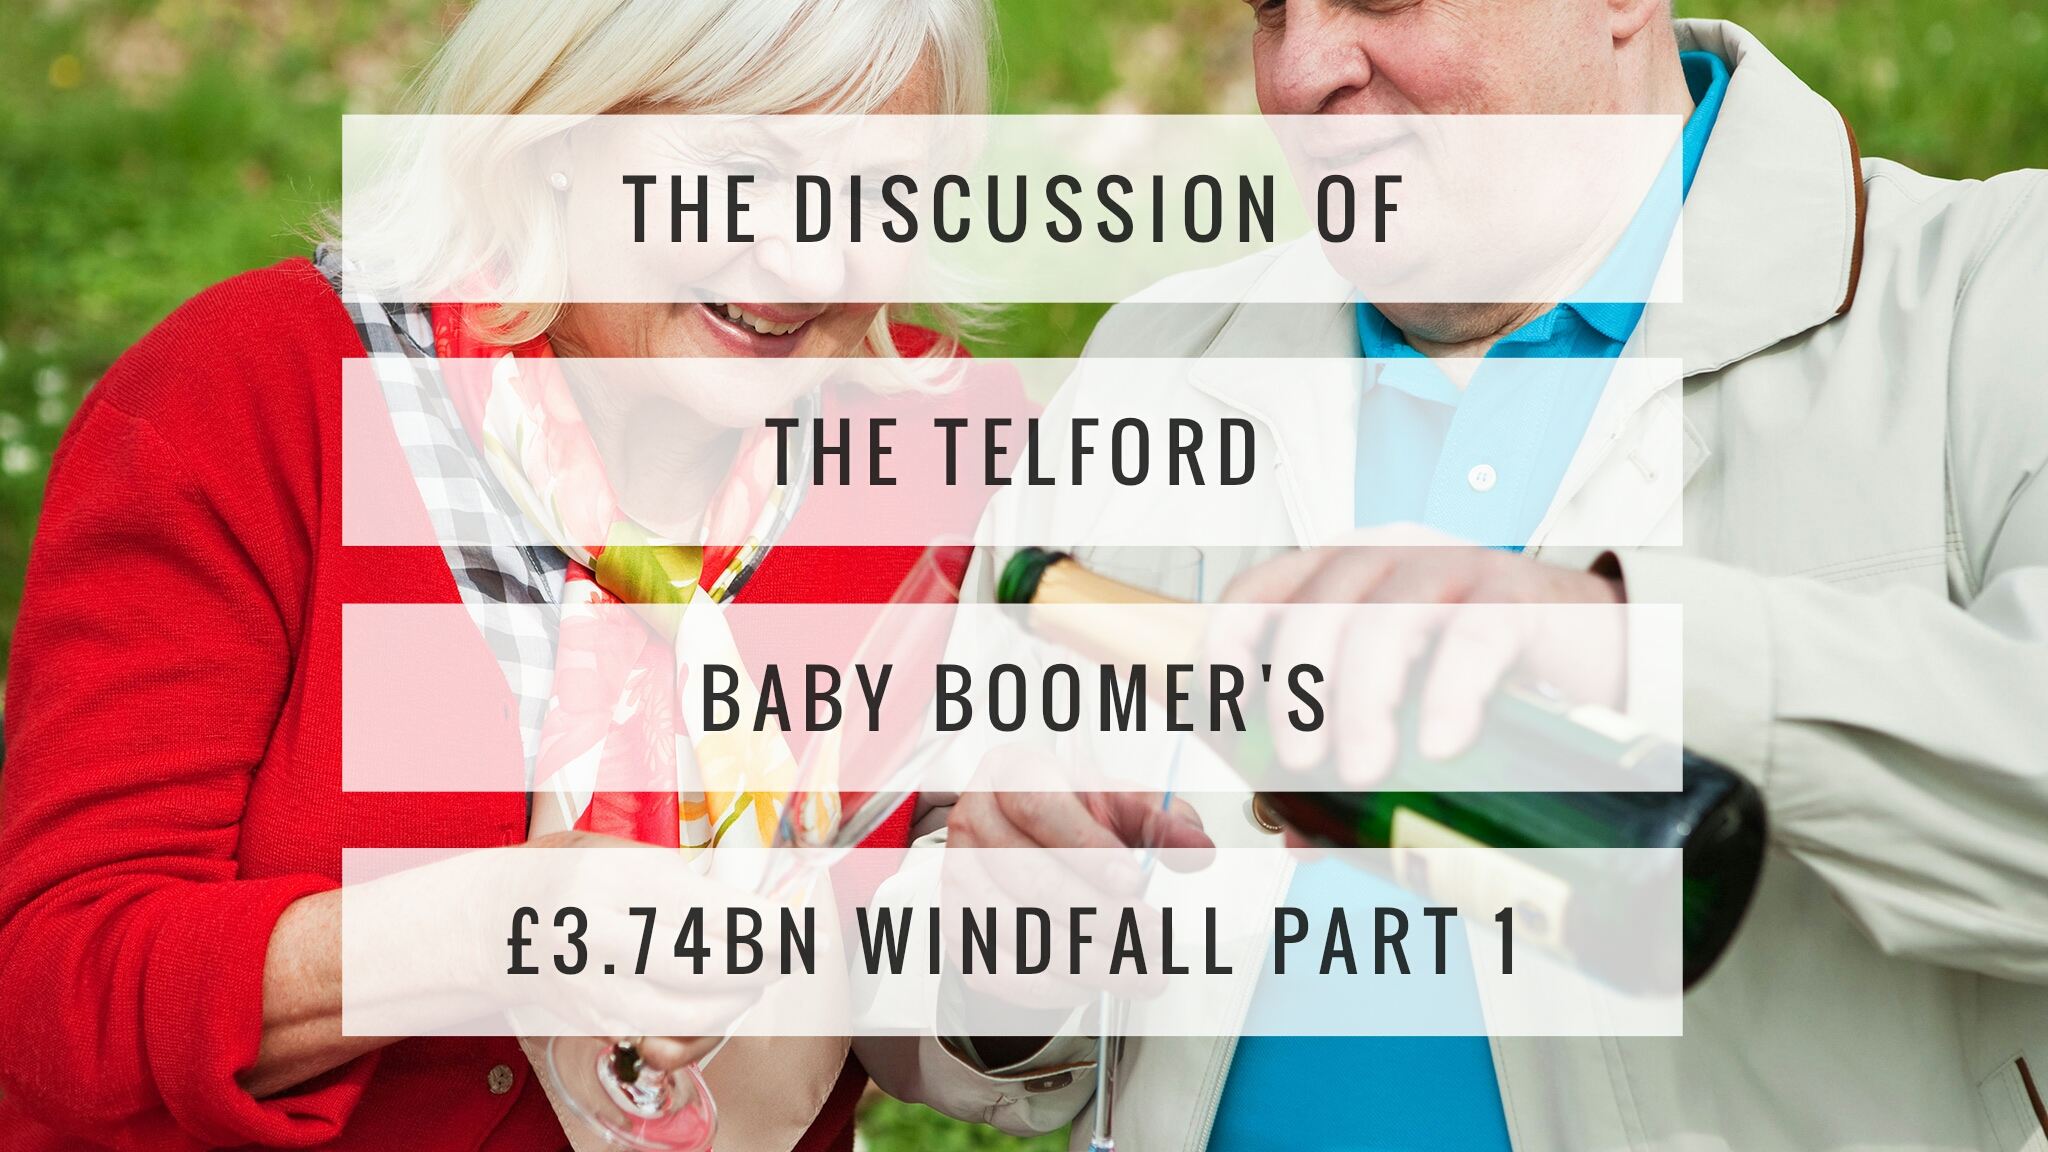 The Discussion of the Telford Baby Boomer’s  £3,468,900,000 Windfall? (Part 1)